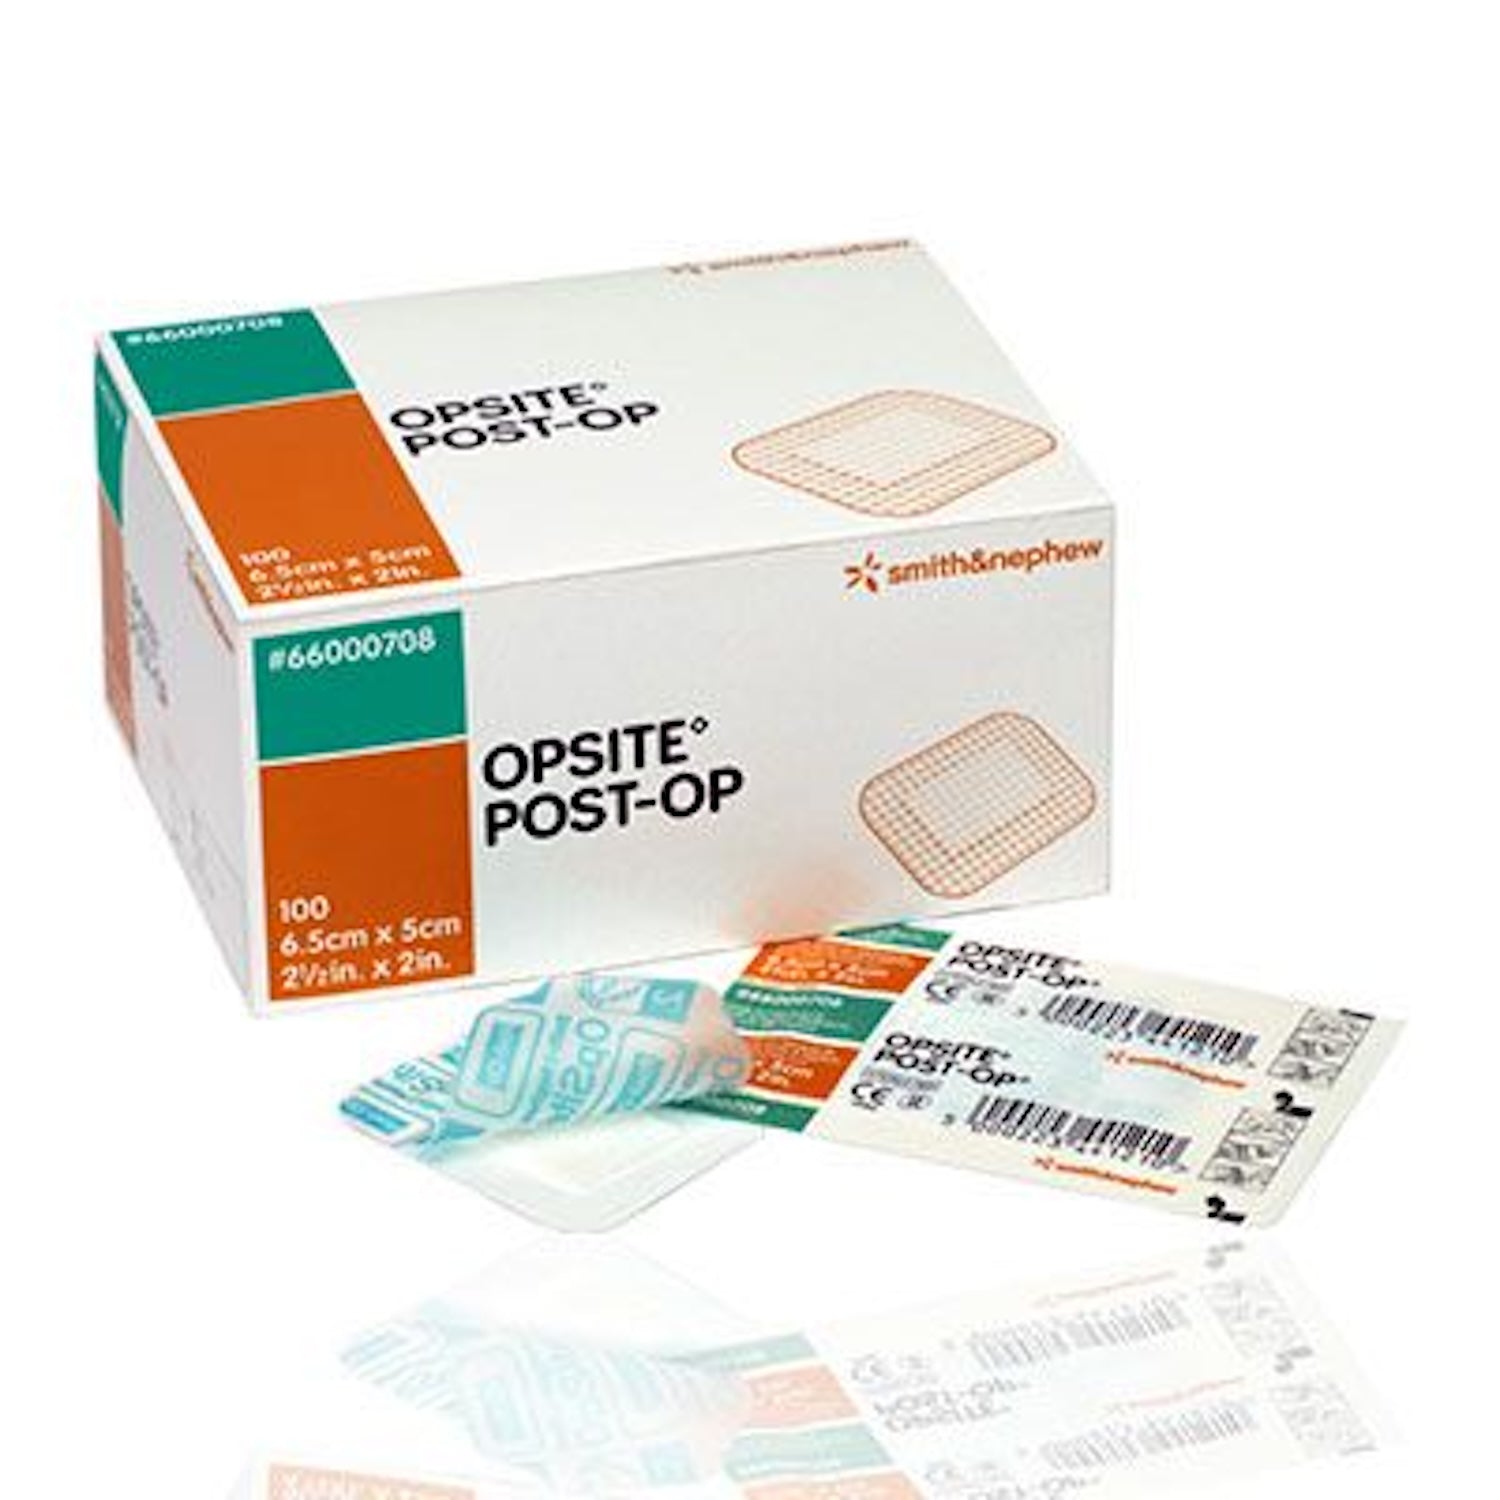 Smith & Nephew Opsite Post-Op | 30 x 10cm | Pack of 20 | Short Expiry Date